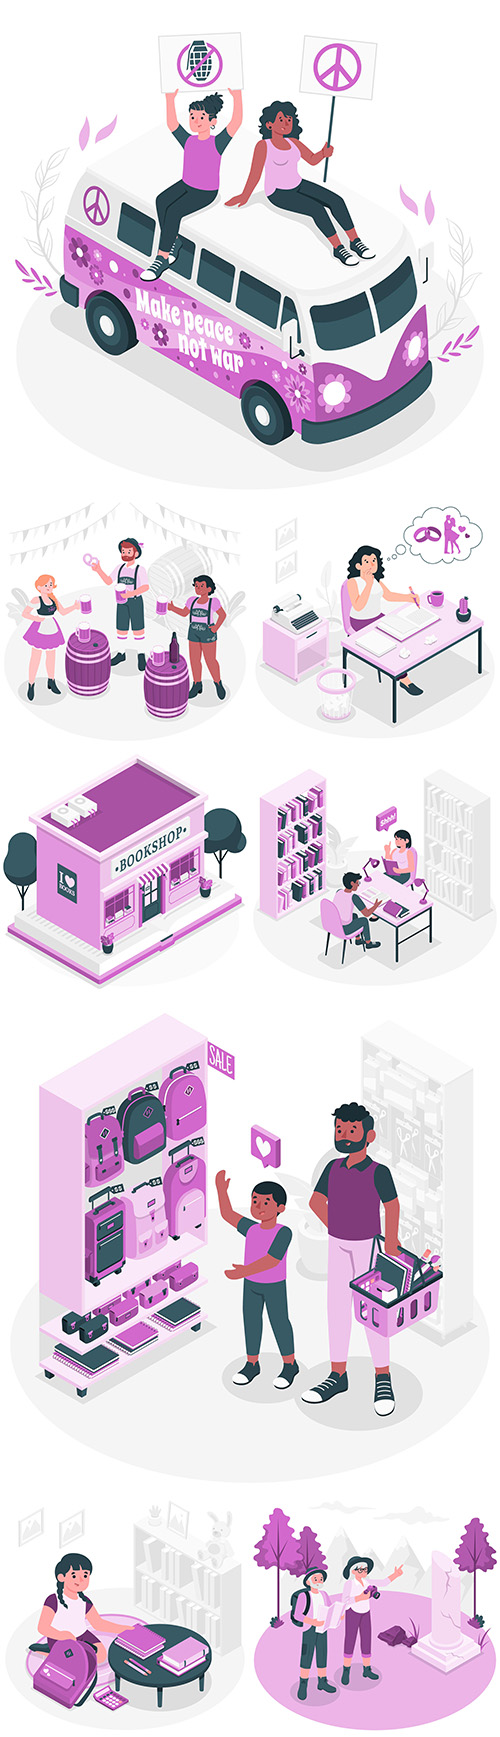 Lifestyle people in different professions illustrations isometric
